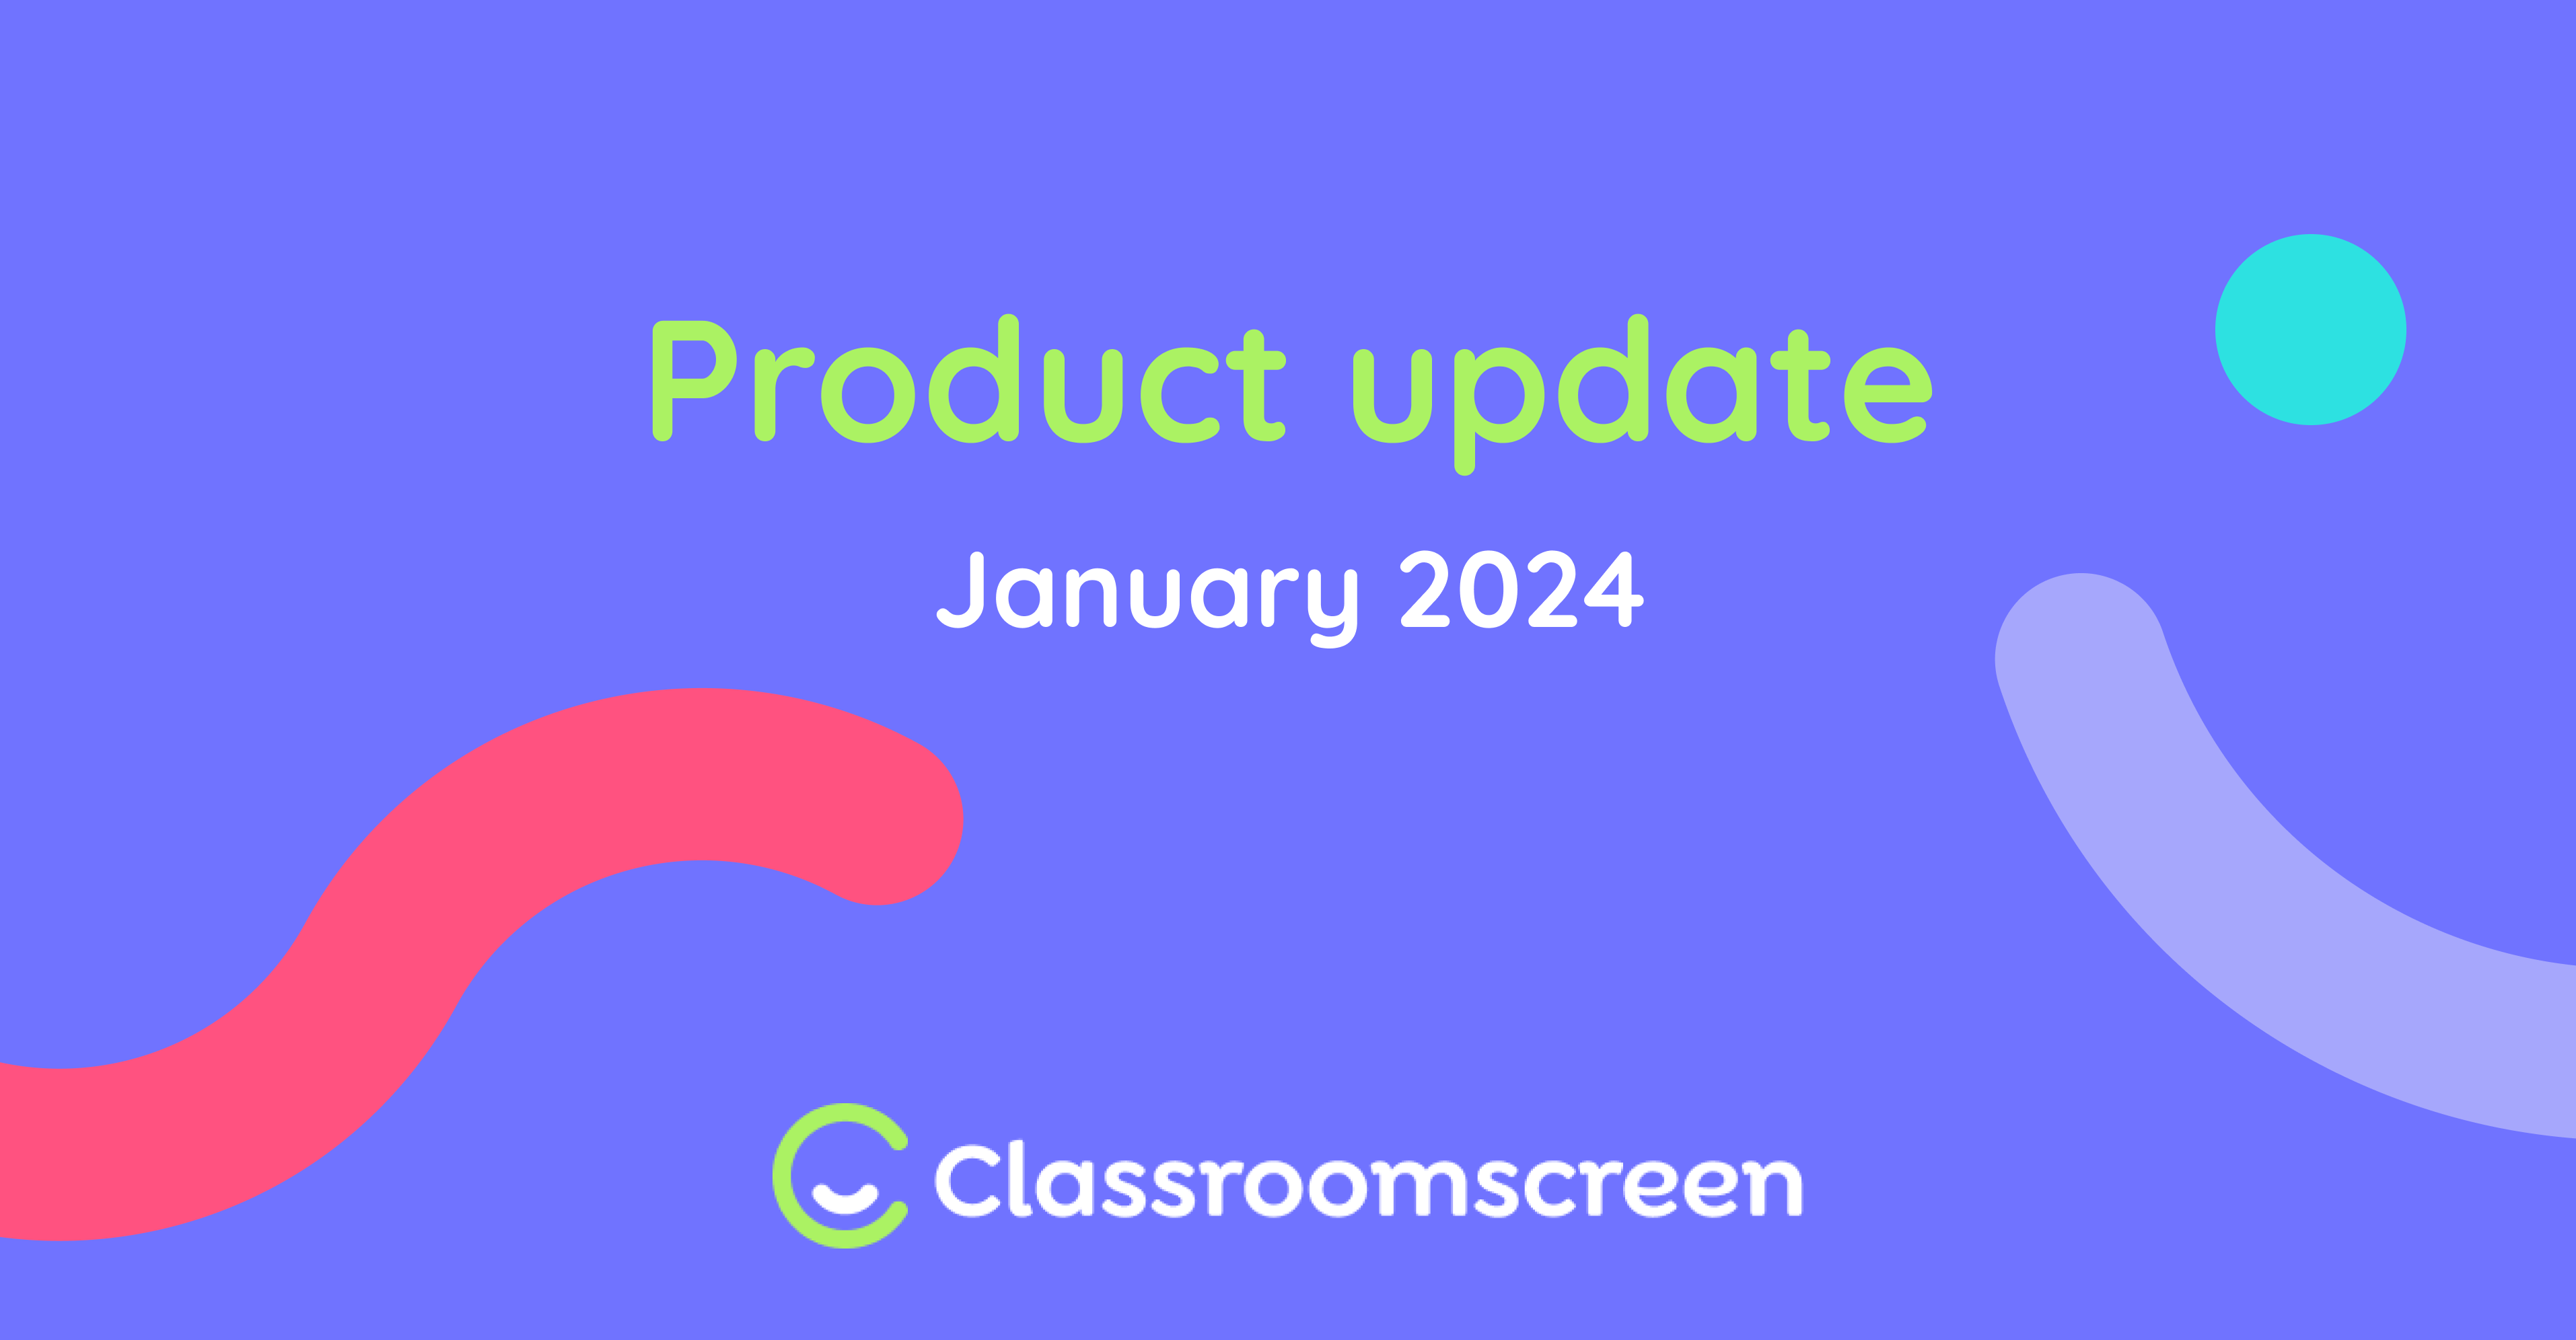 This blog contains all the updates we've made to Classroomscreen in January 2024